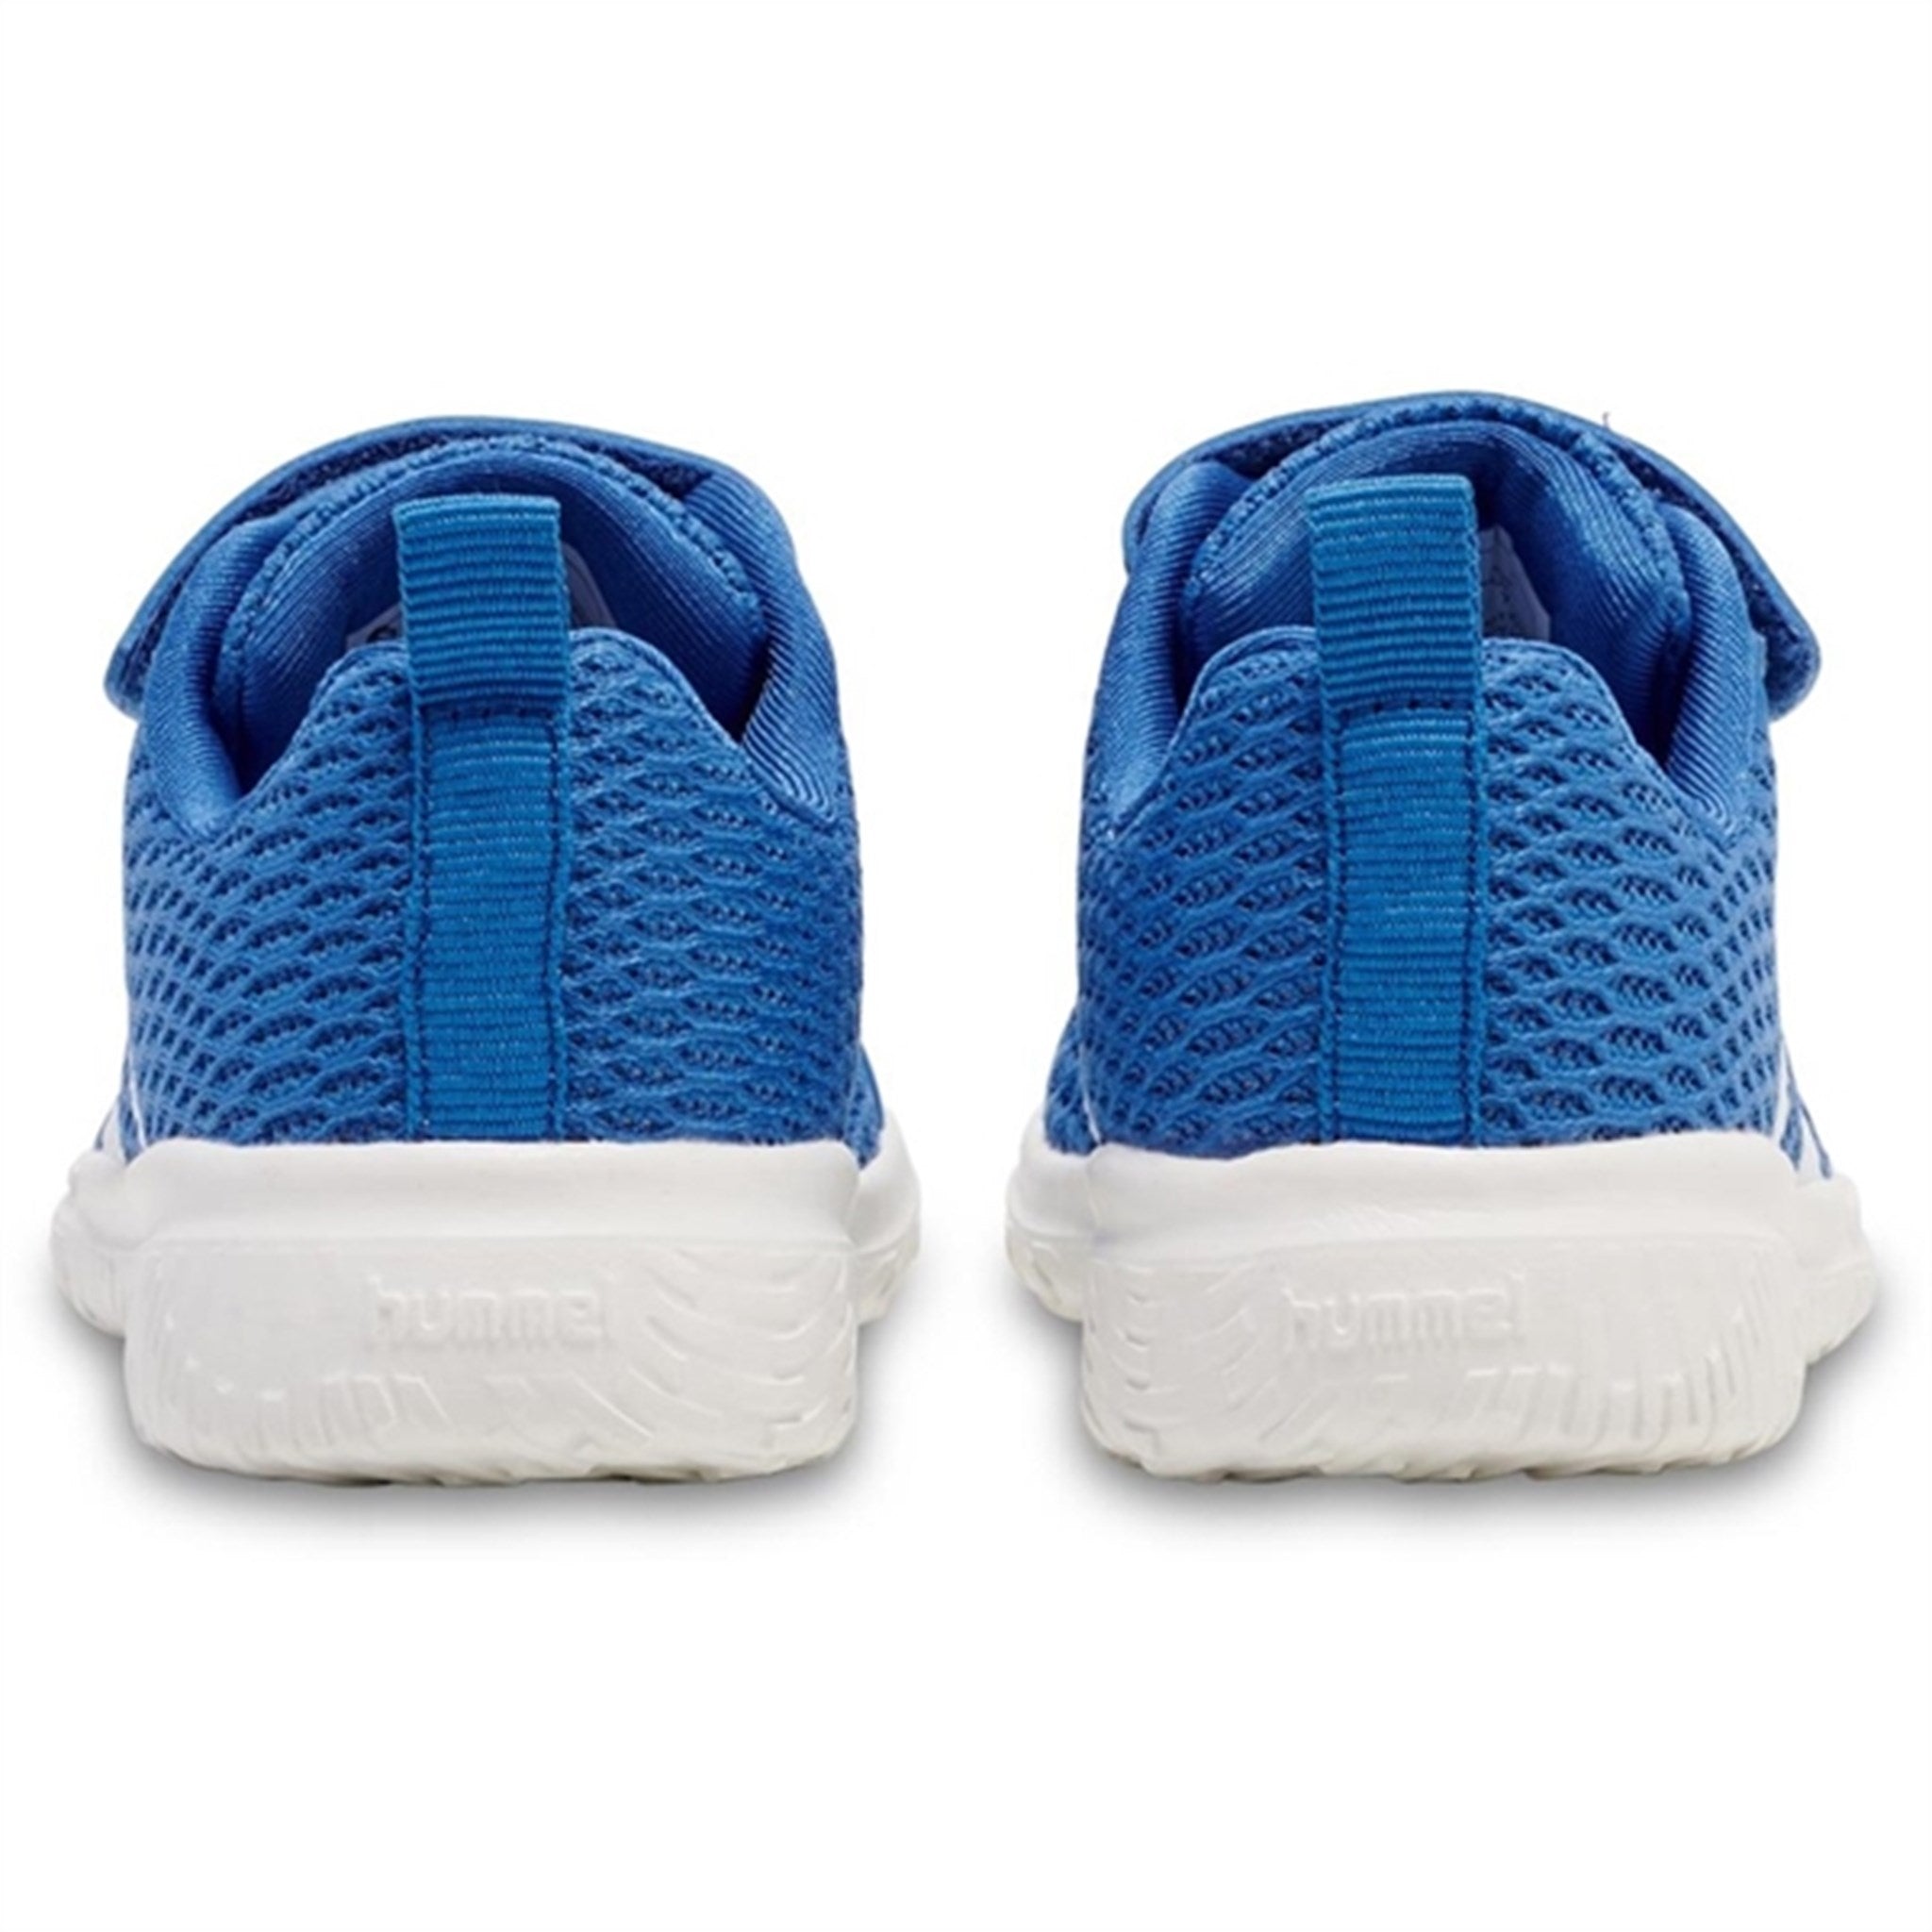 Hummel Blue/White Actus Recycled Infant Sneakers Blue/White 5